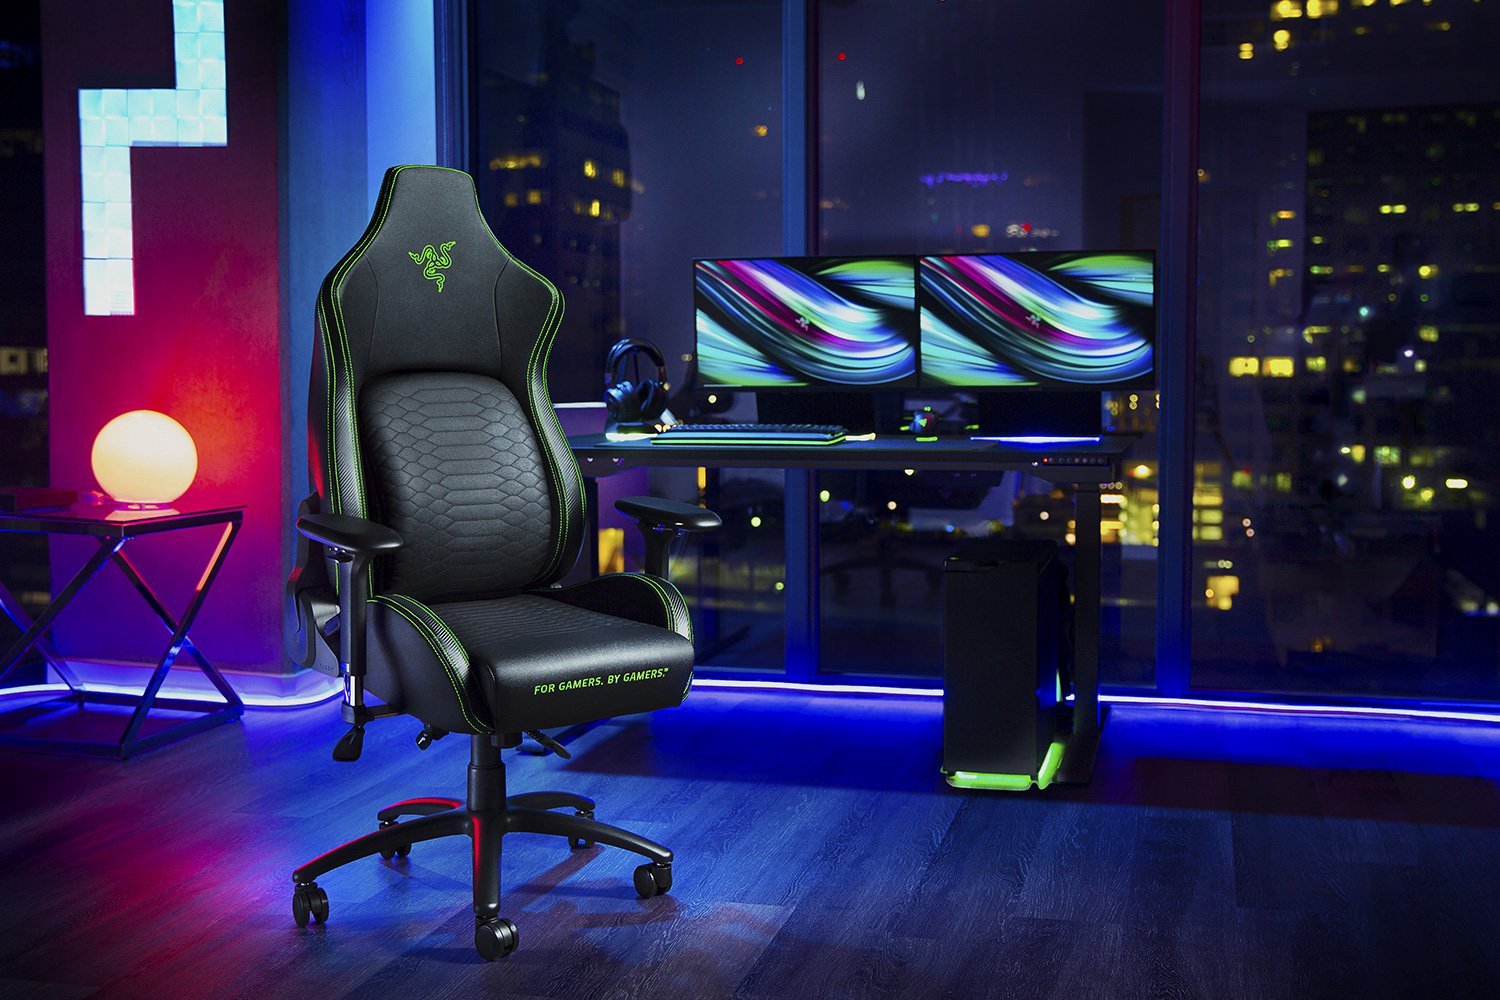 Get 20% off two Razer chairs